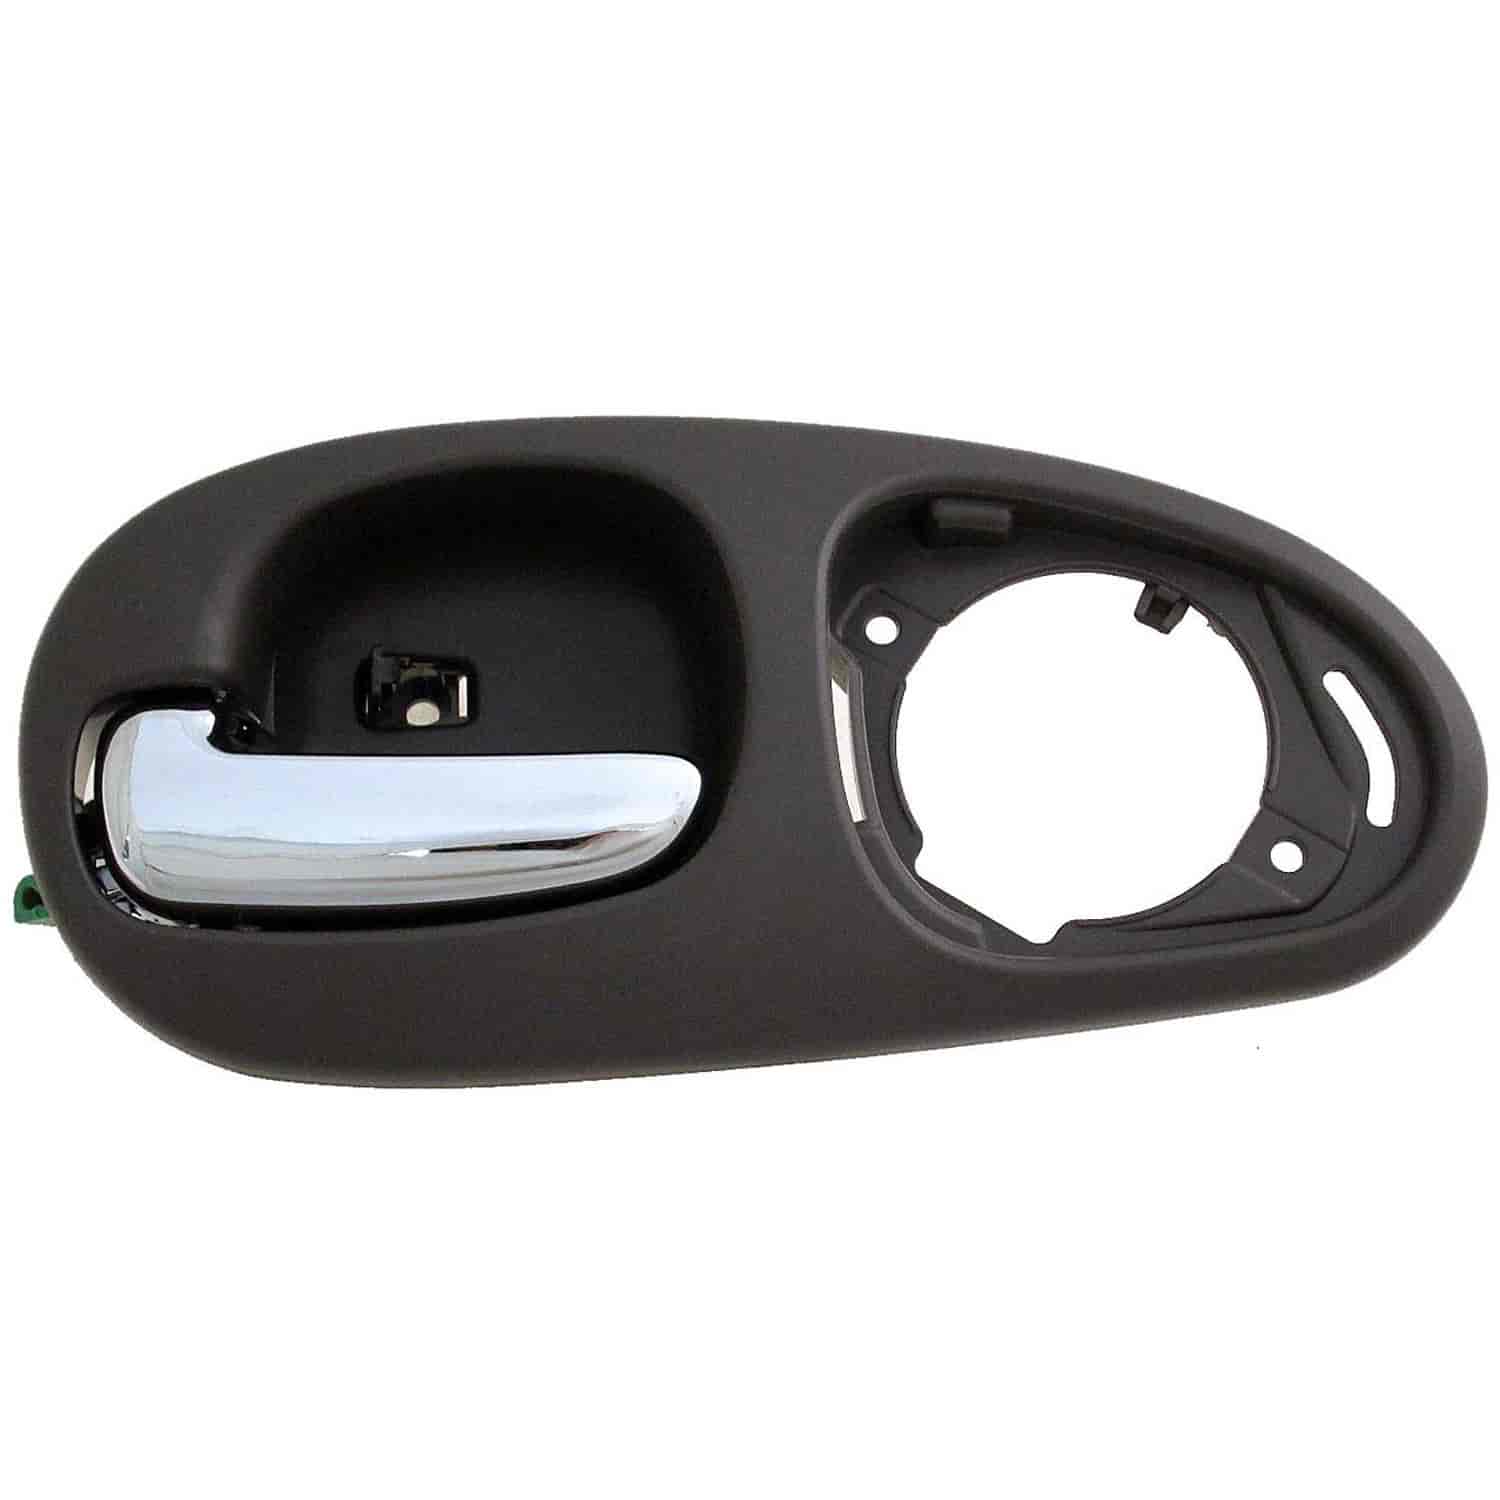 Interior Door Handle Rear Left Kit Chrome and Sage